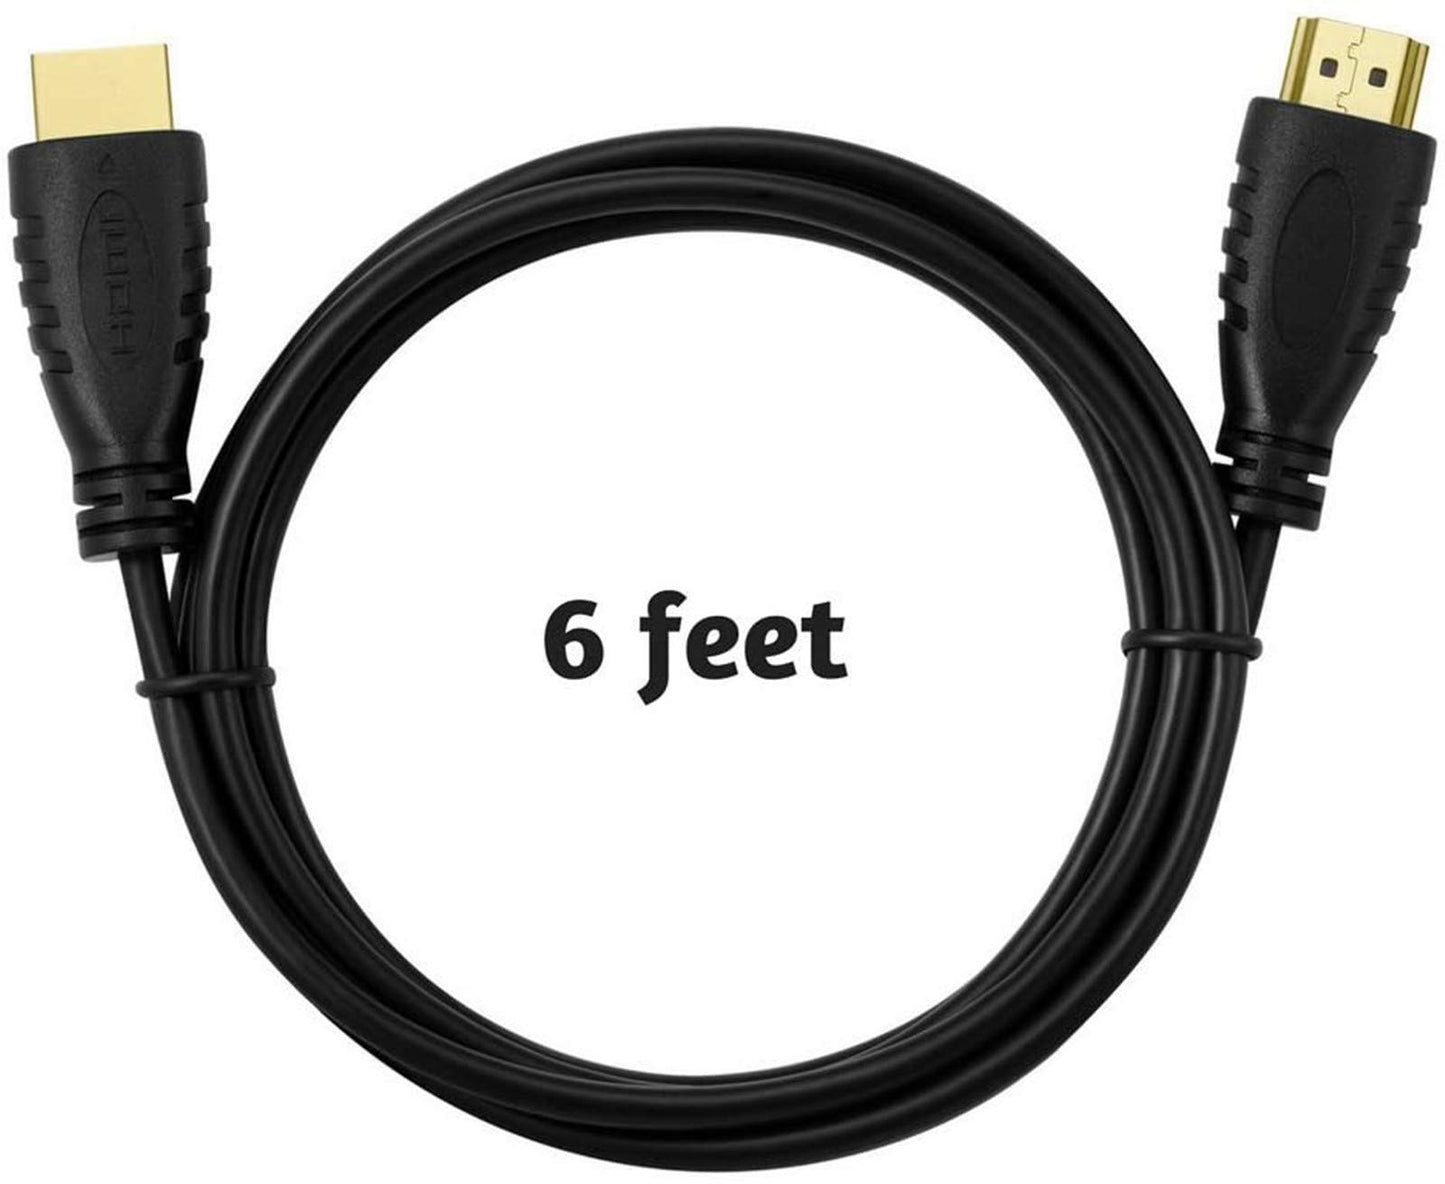 5 Pack High-Speed HDMI Cables-6ft with 90 Degree Adapter, Gold Plated Connectors, Cord Ties for TV PC Playstaion Support Ethernet, 3D, 1080P, ARC, Save Money & Deliver Dazzling Quality